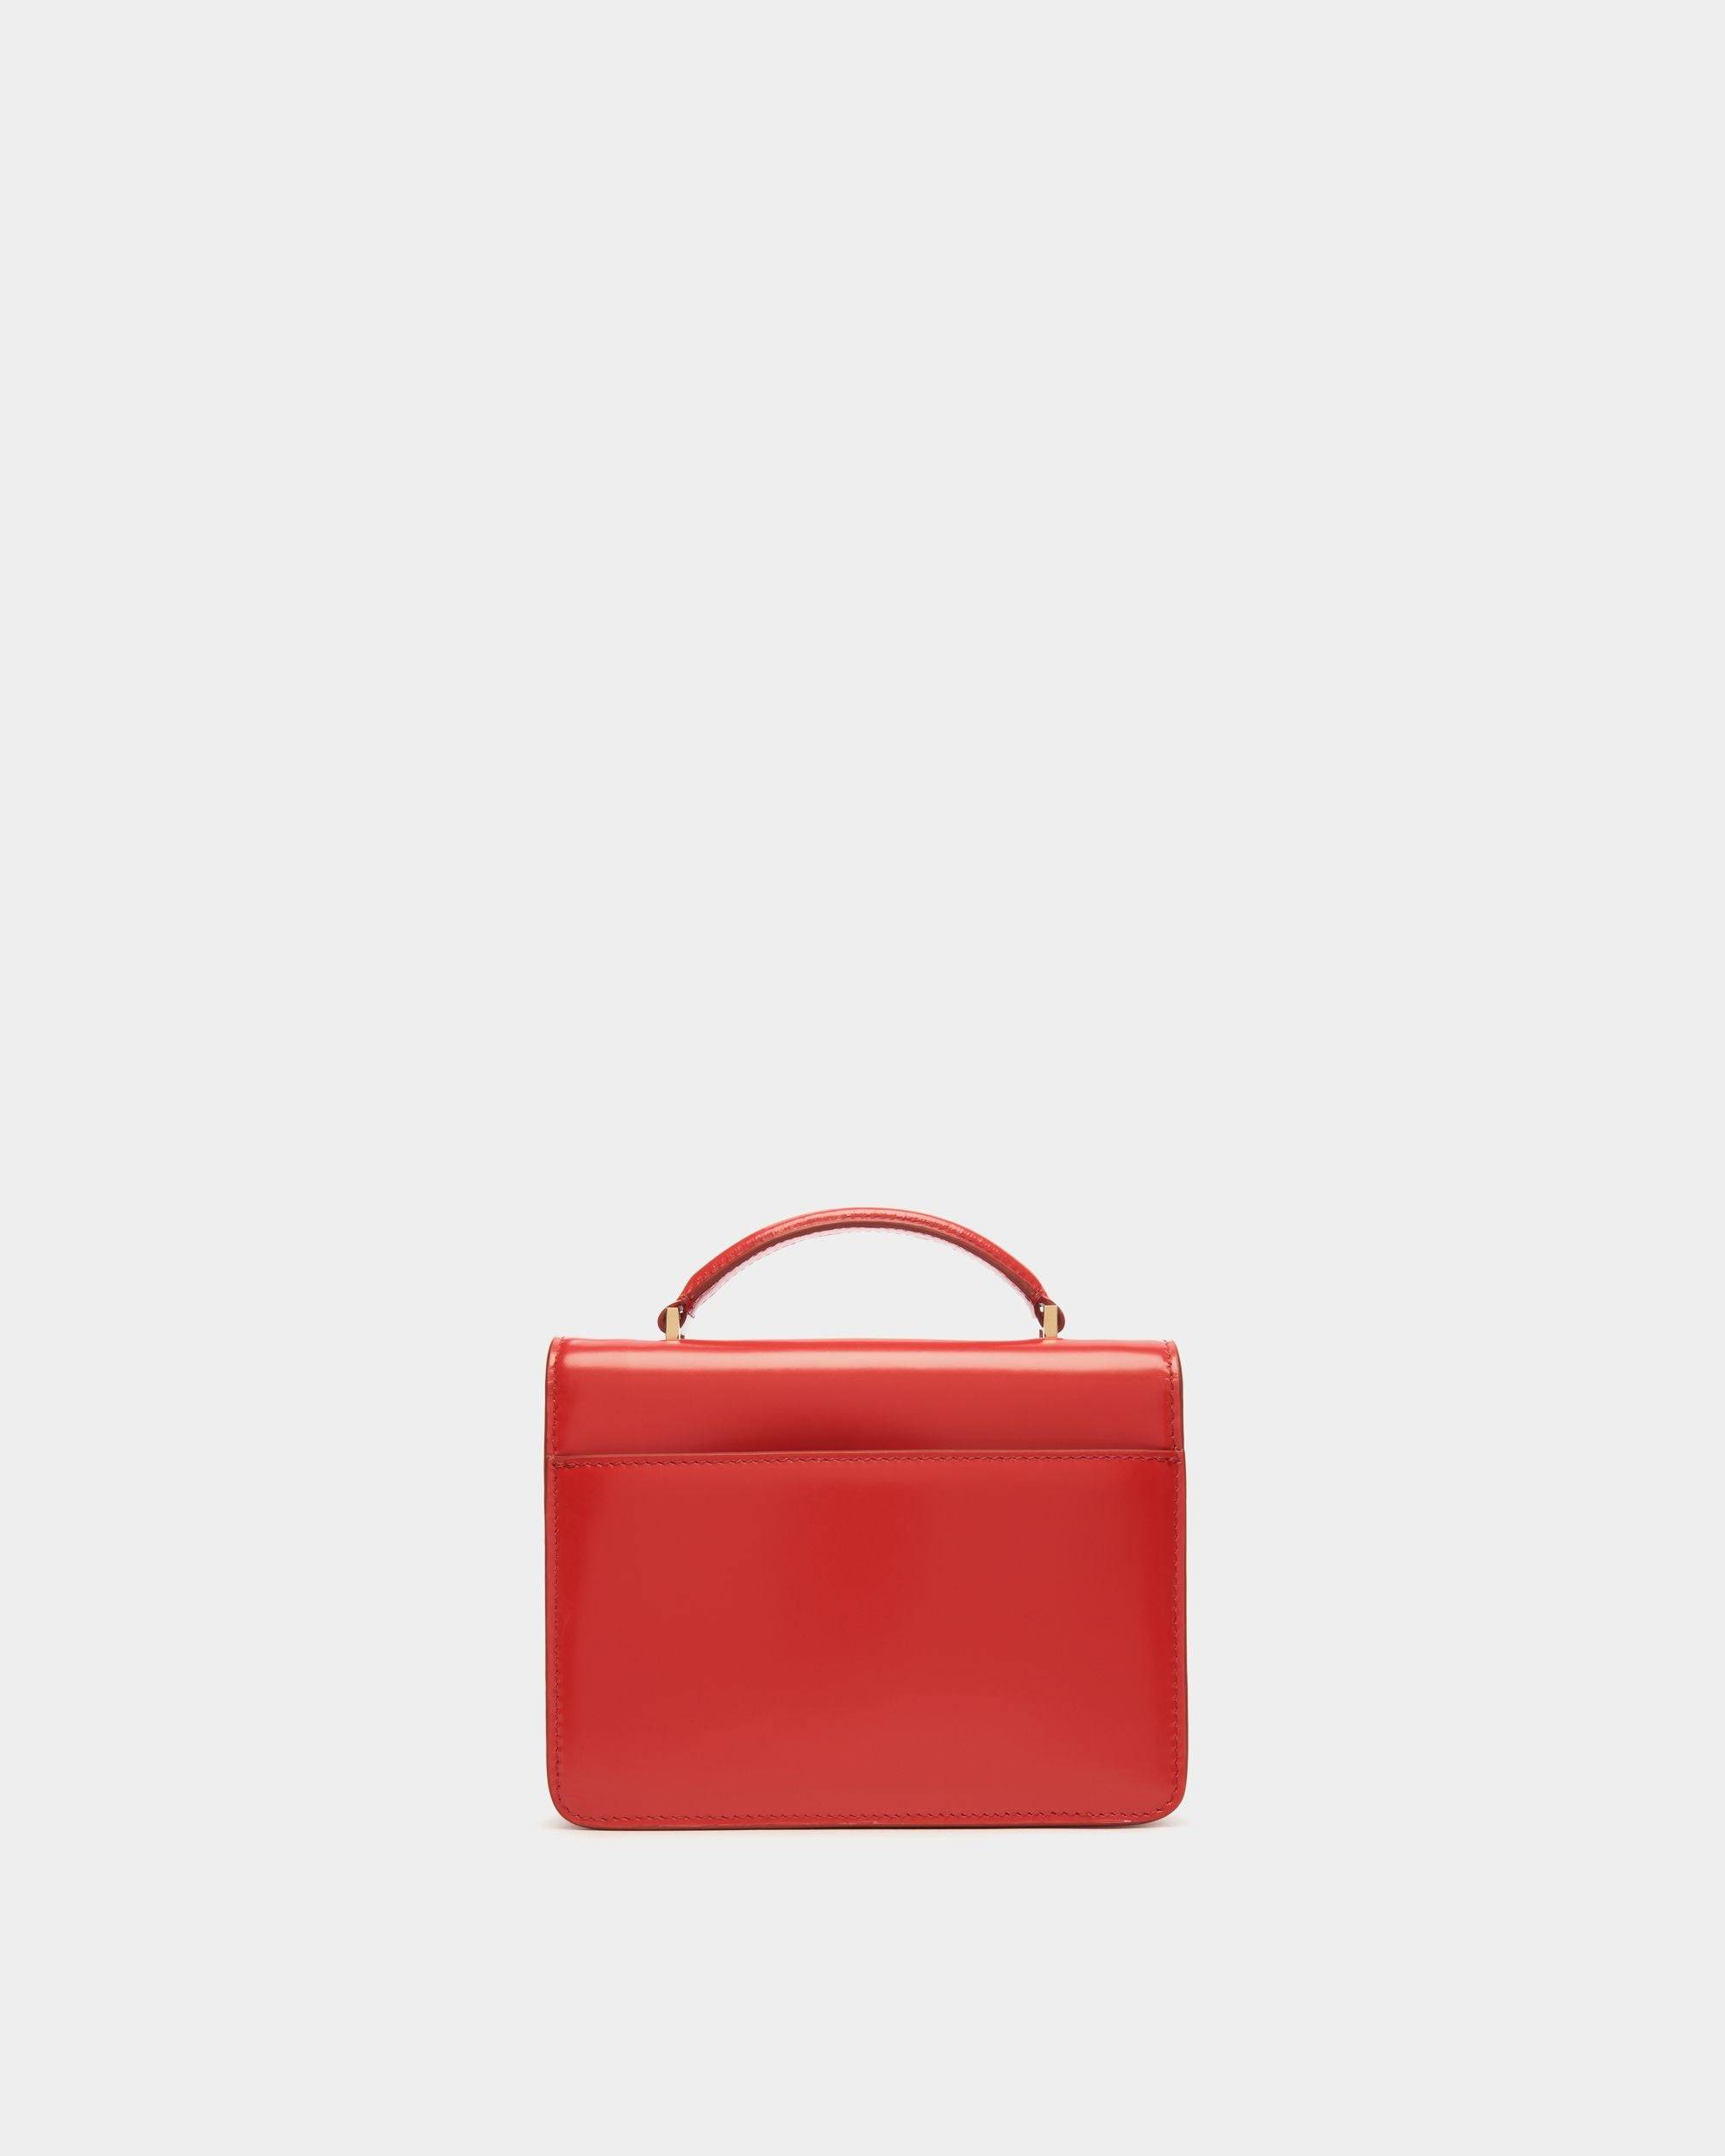 Women's Ollam Mini Top Handle Bag in Candy Red Brushed Leather | Bally | Still Life Back